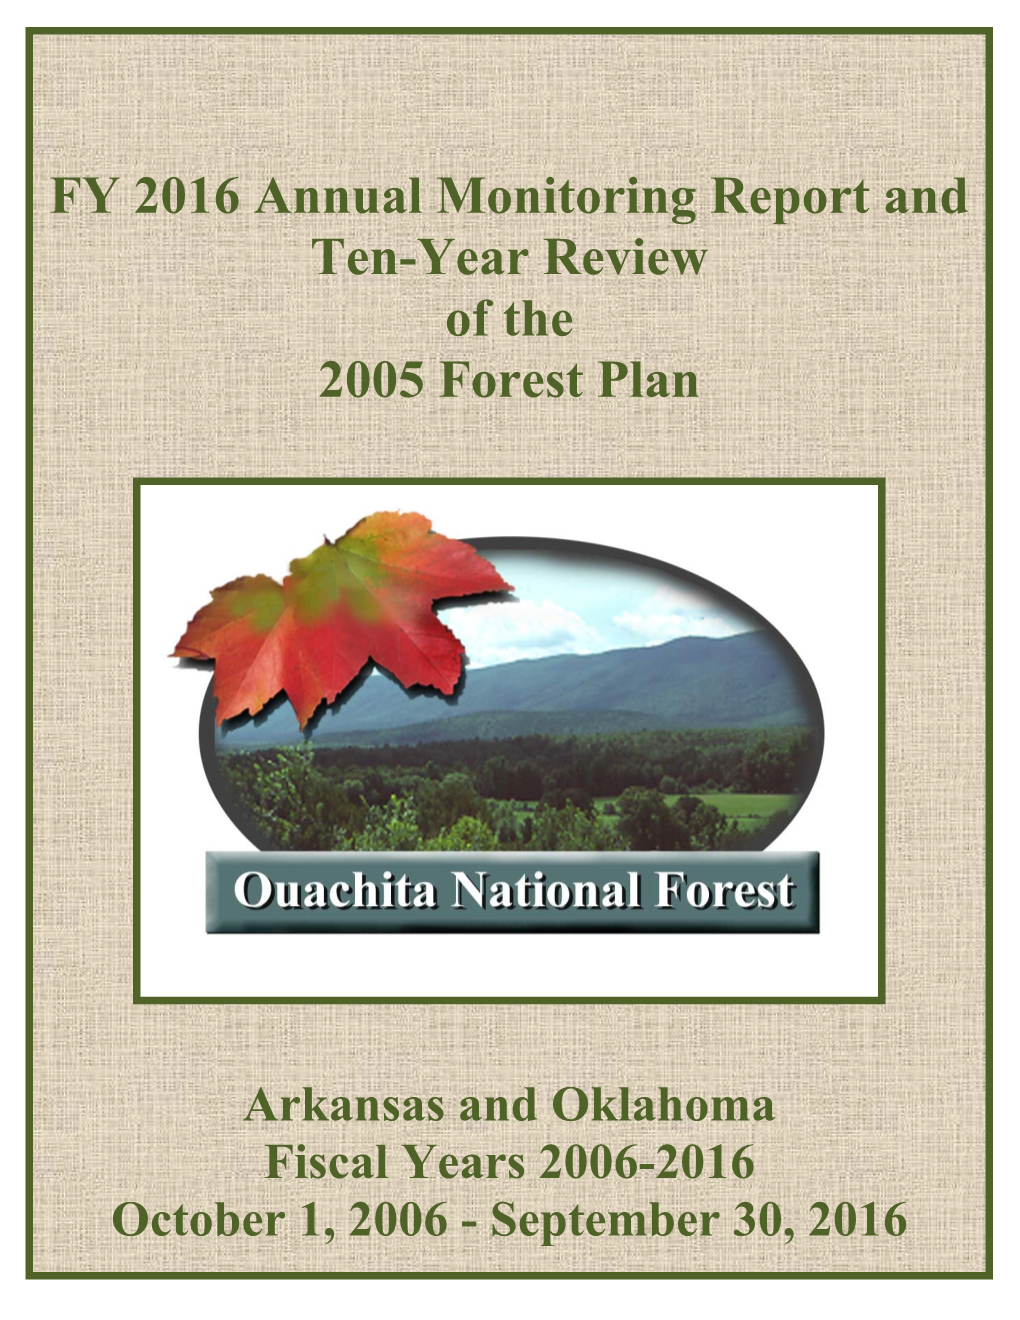 FY 2016 Annual Monitoring Report and Ten Year Review